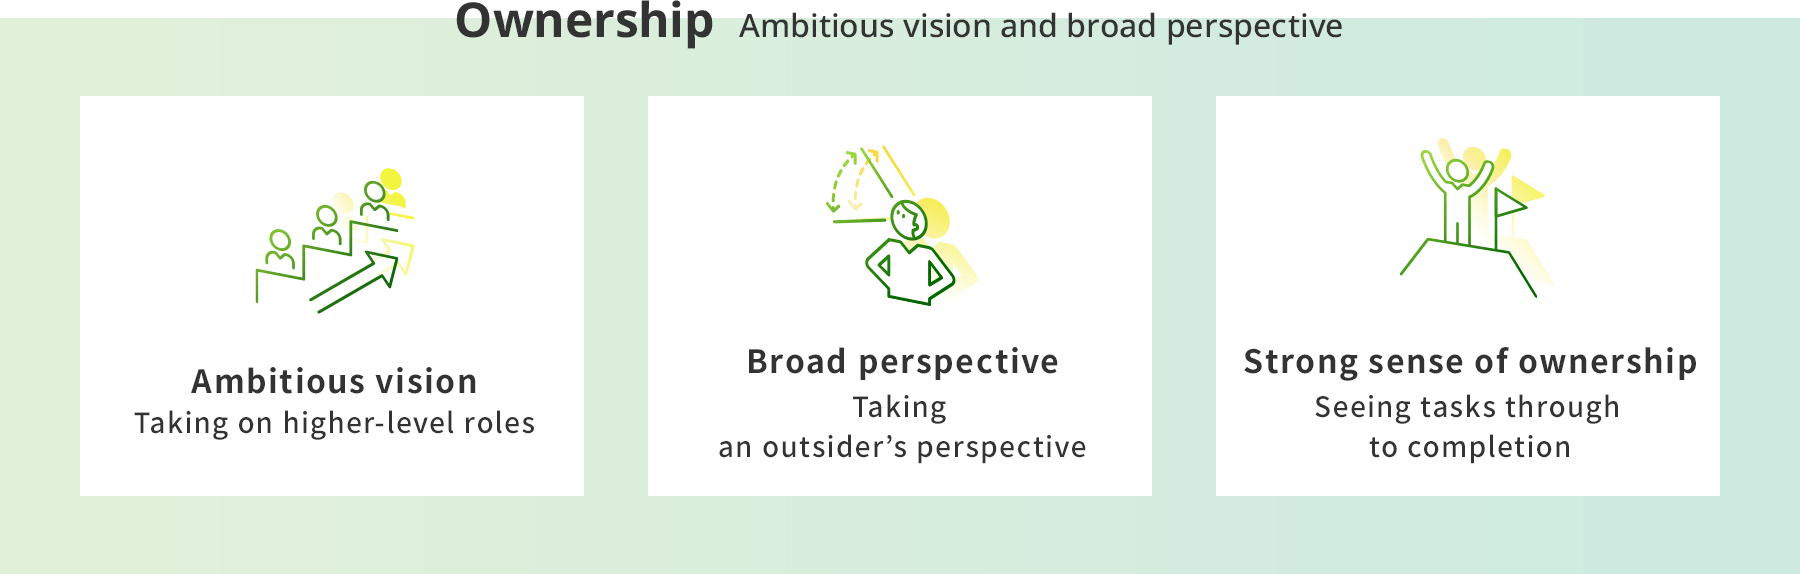 Ownership Ambitious vision and broad perspective Ambitious vision Taking on higher-level roles Broad perspective Taking an outsider’s perspective Strong sense of ownership Seeing tasks through to completion